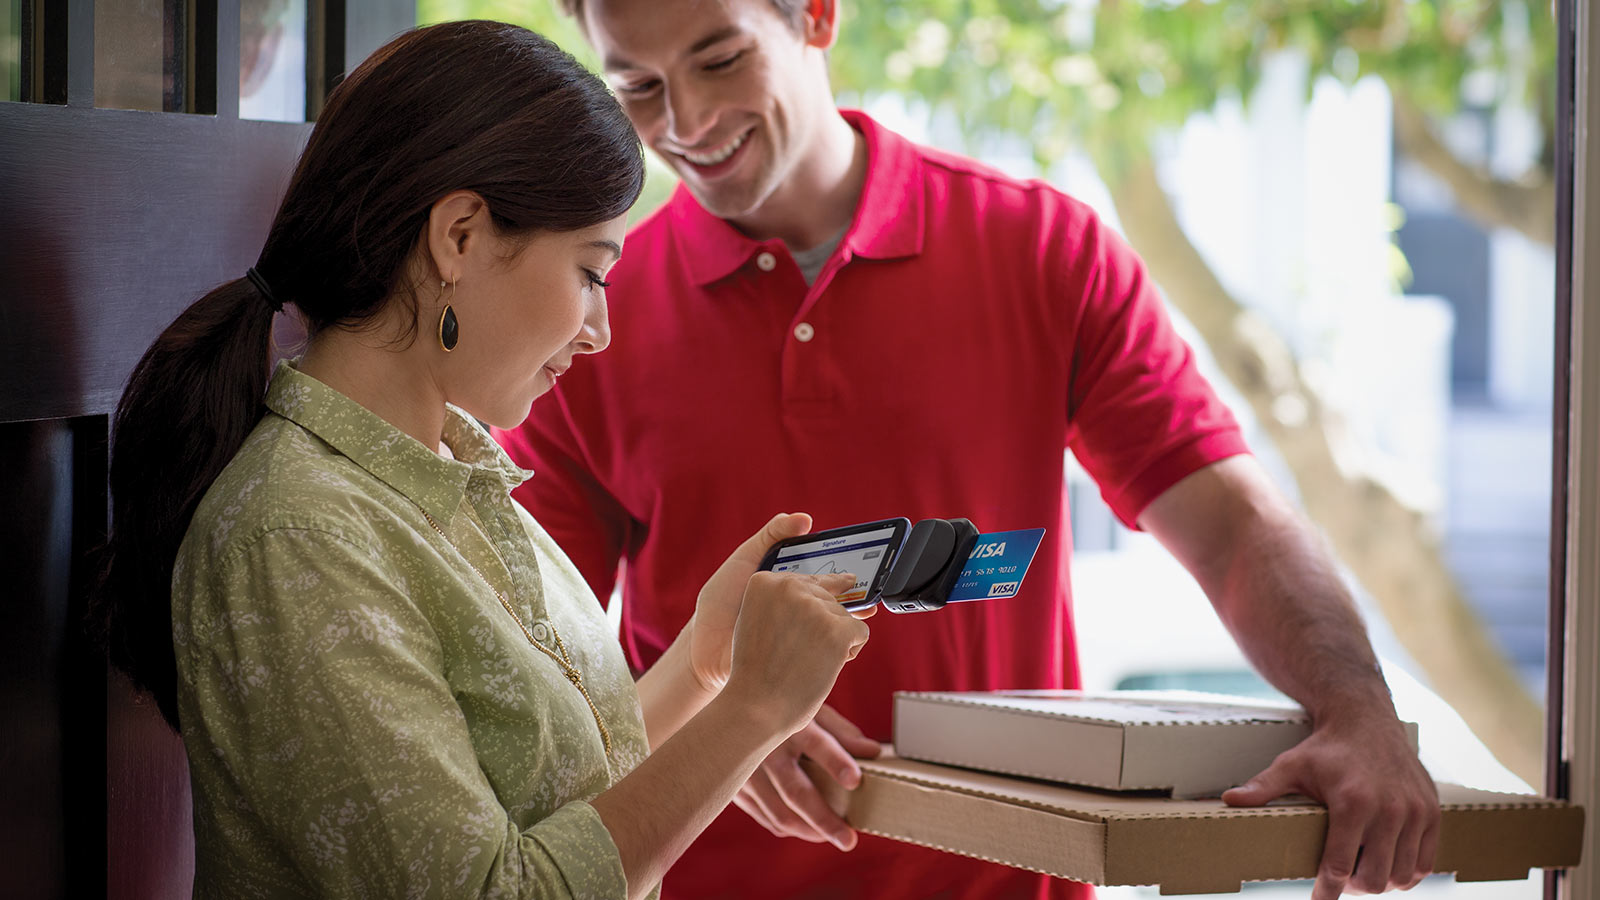 A pizza delivery person holding two pizza boxes as the customer is making a mobile payment.